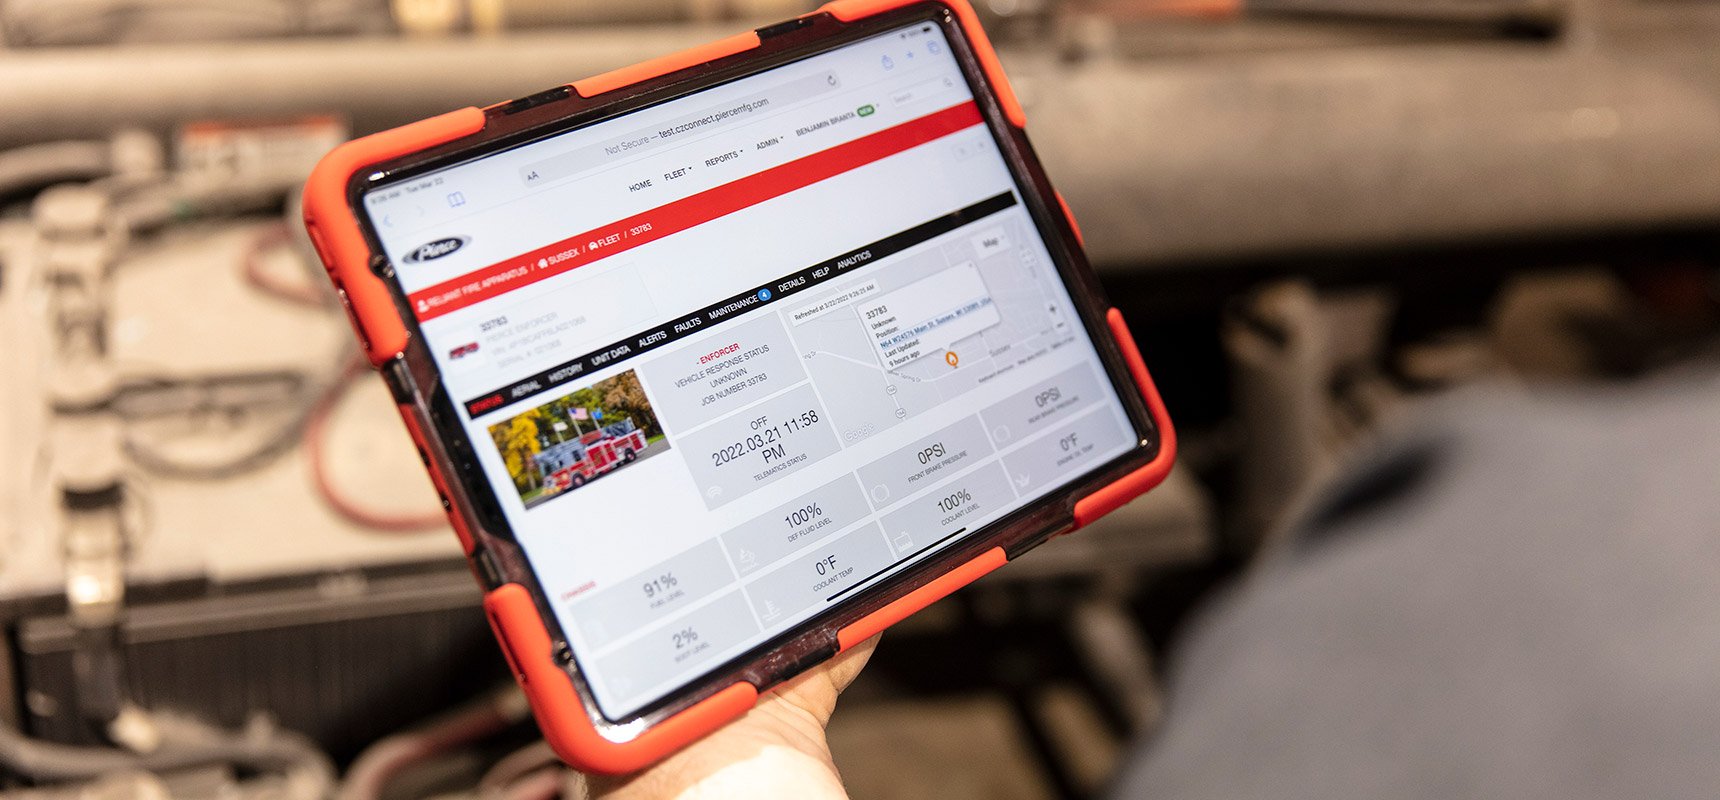 A hand holds an orange ipad case with fire truck telematics on the device screen. 